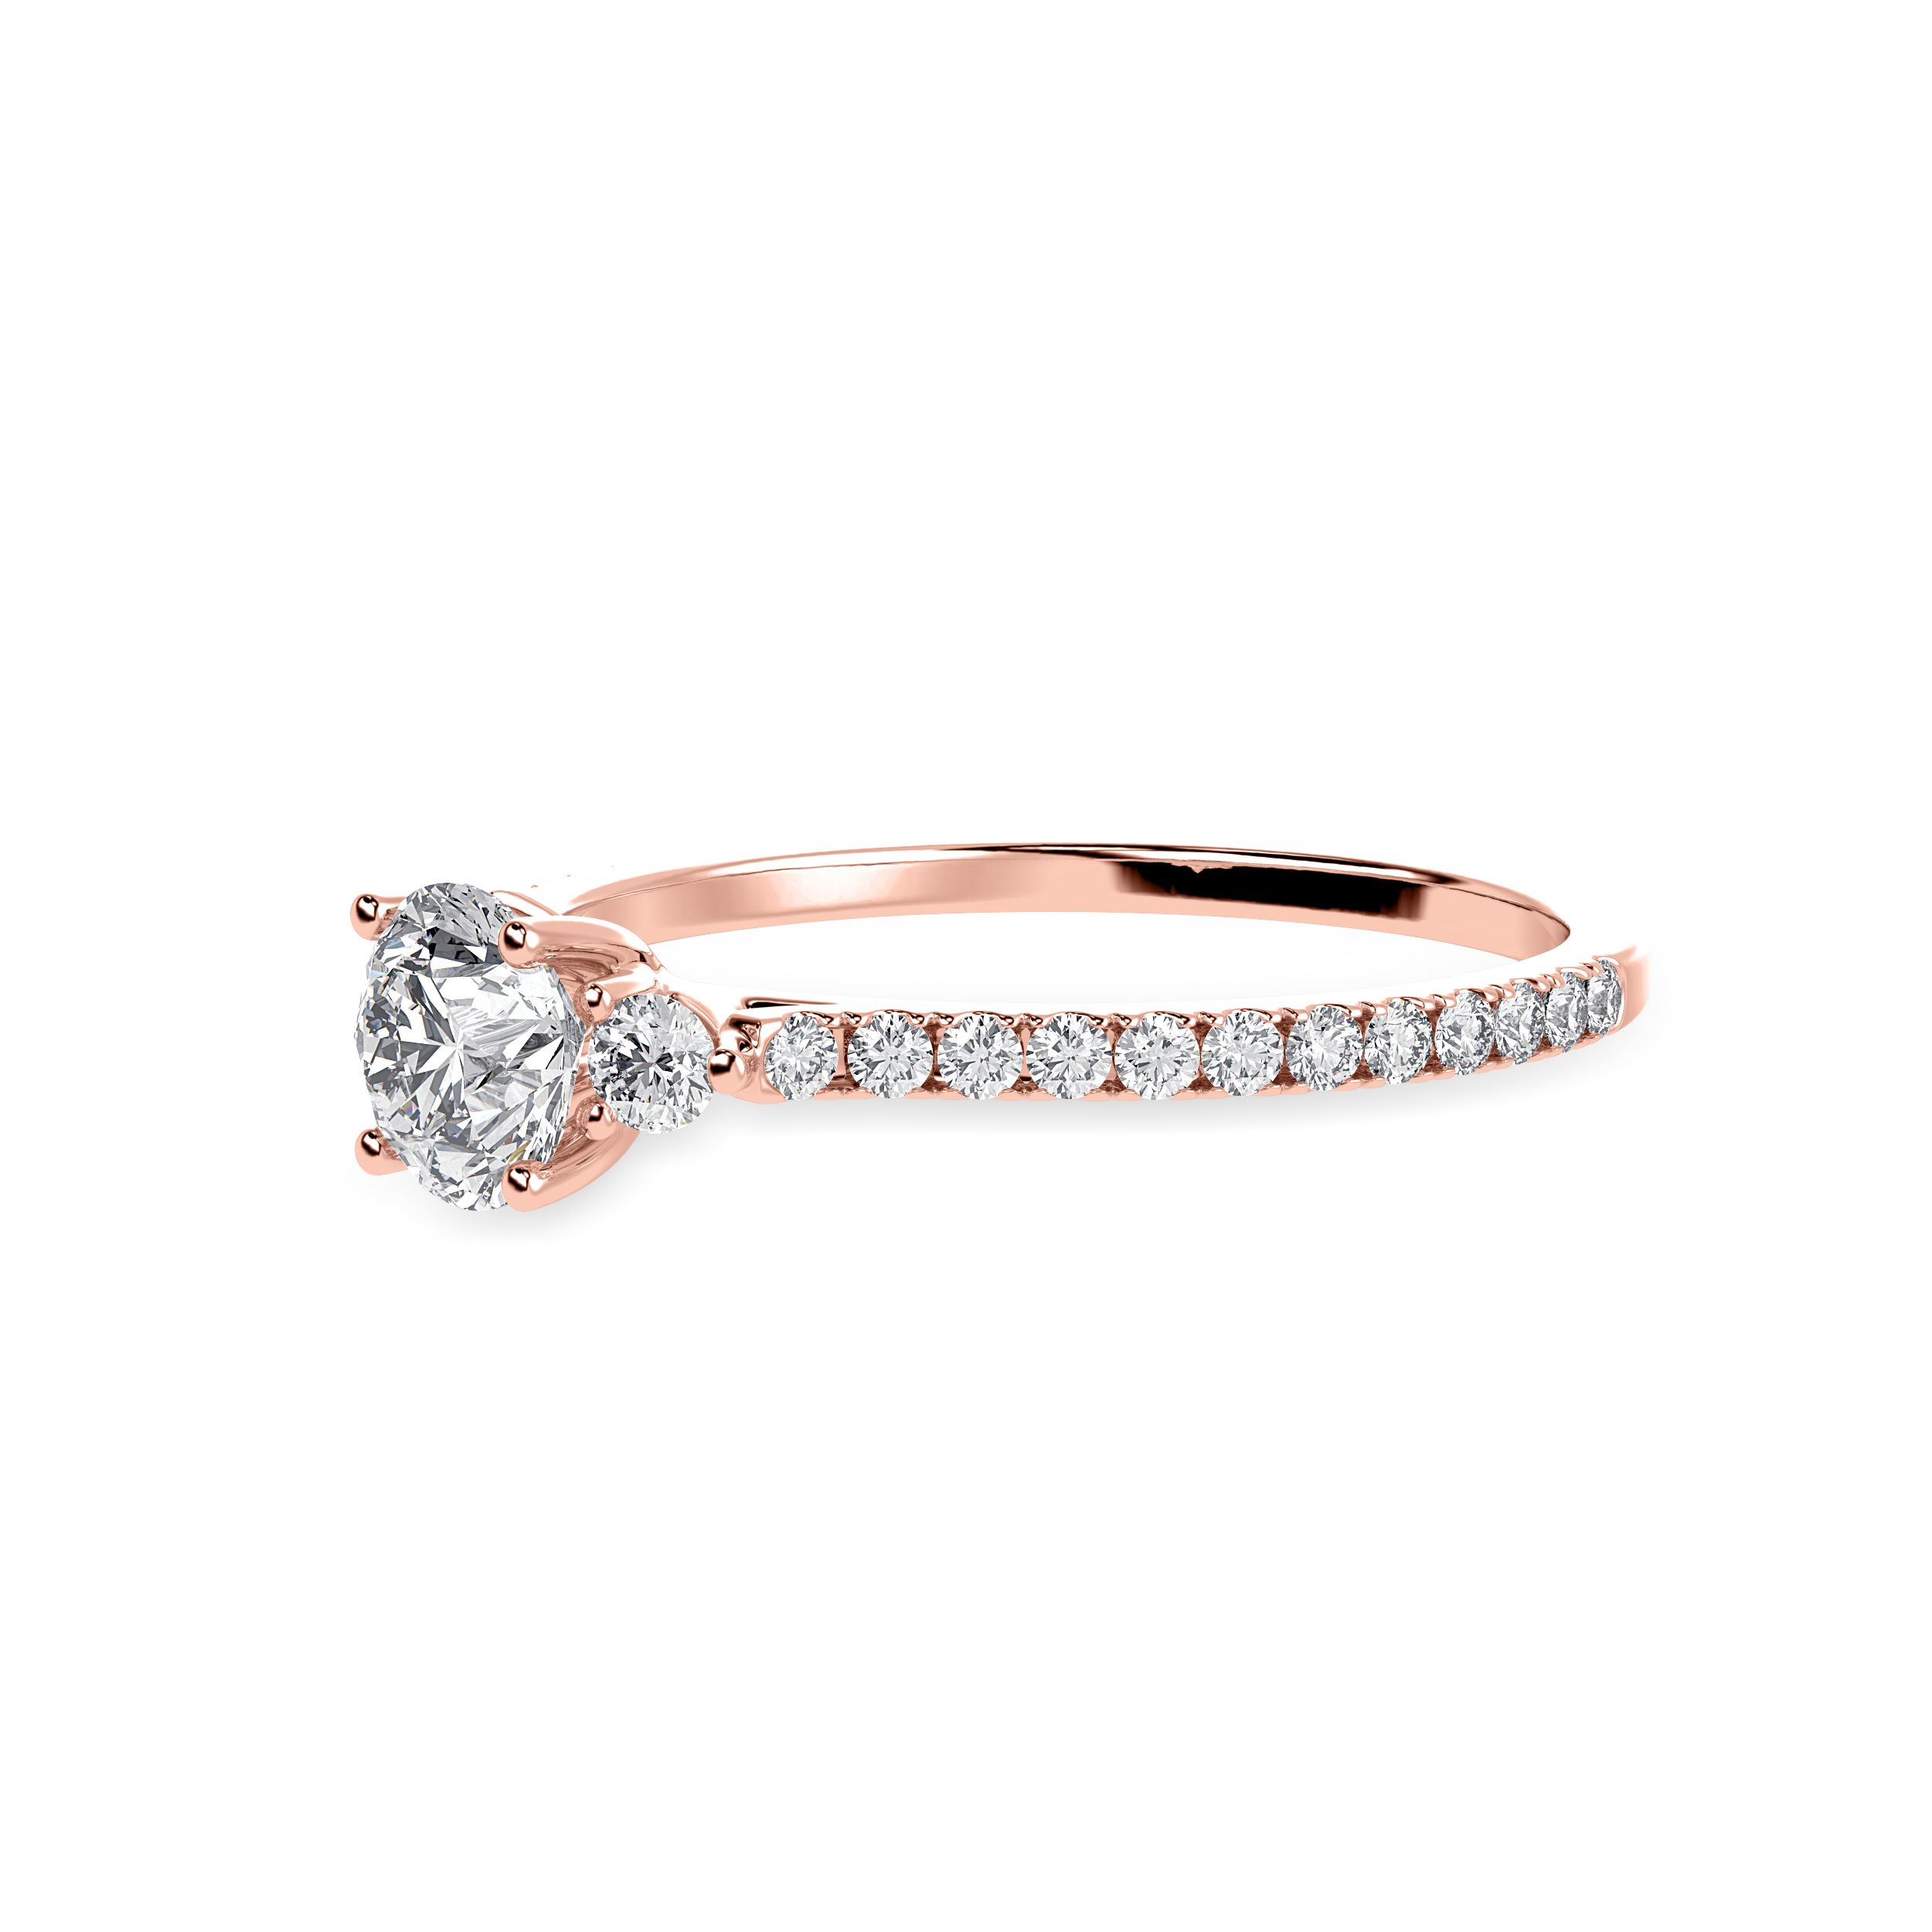 50-Pointer Solitaire Diamond Accents Shank 18K Rose Gold Ring JL AU 1238R-A   Jewelove.US